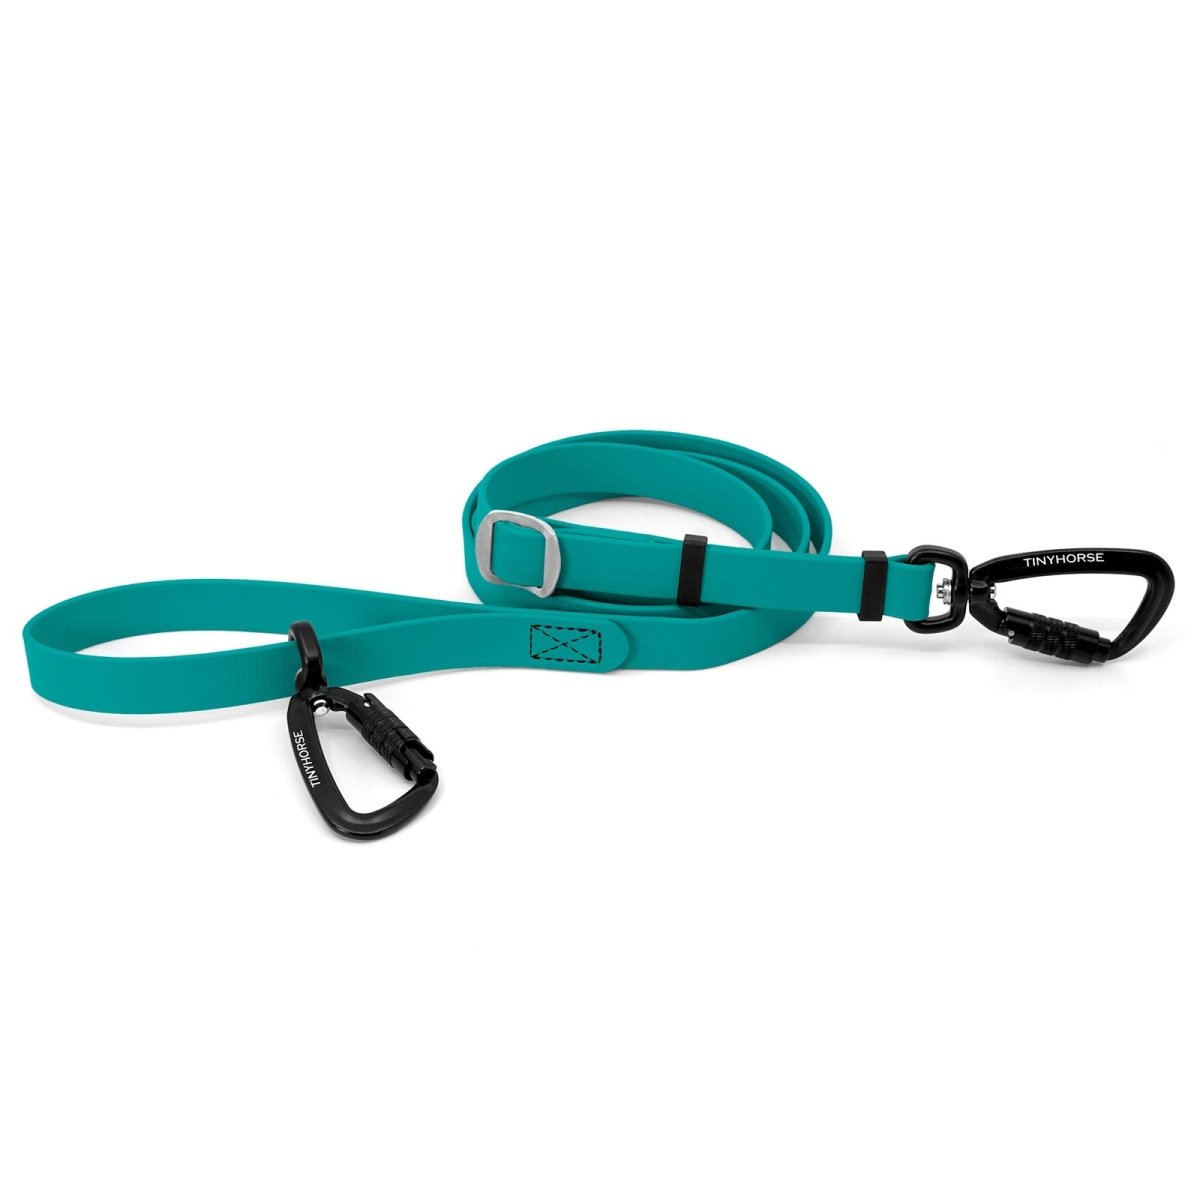 An adjustable teal-coloured Lead-All Pro Extra made of BioThane with 2 auto-locking carabiners